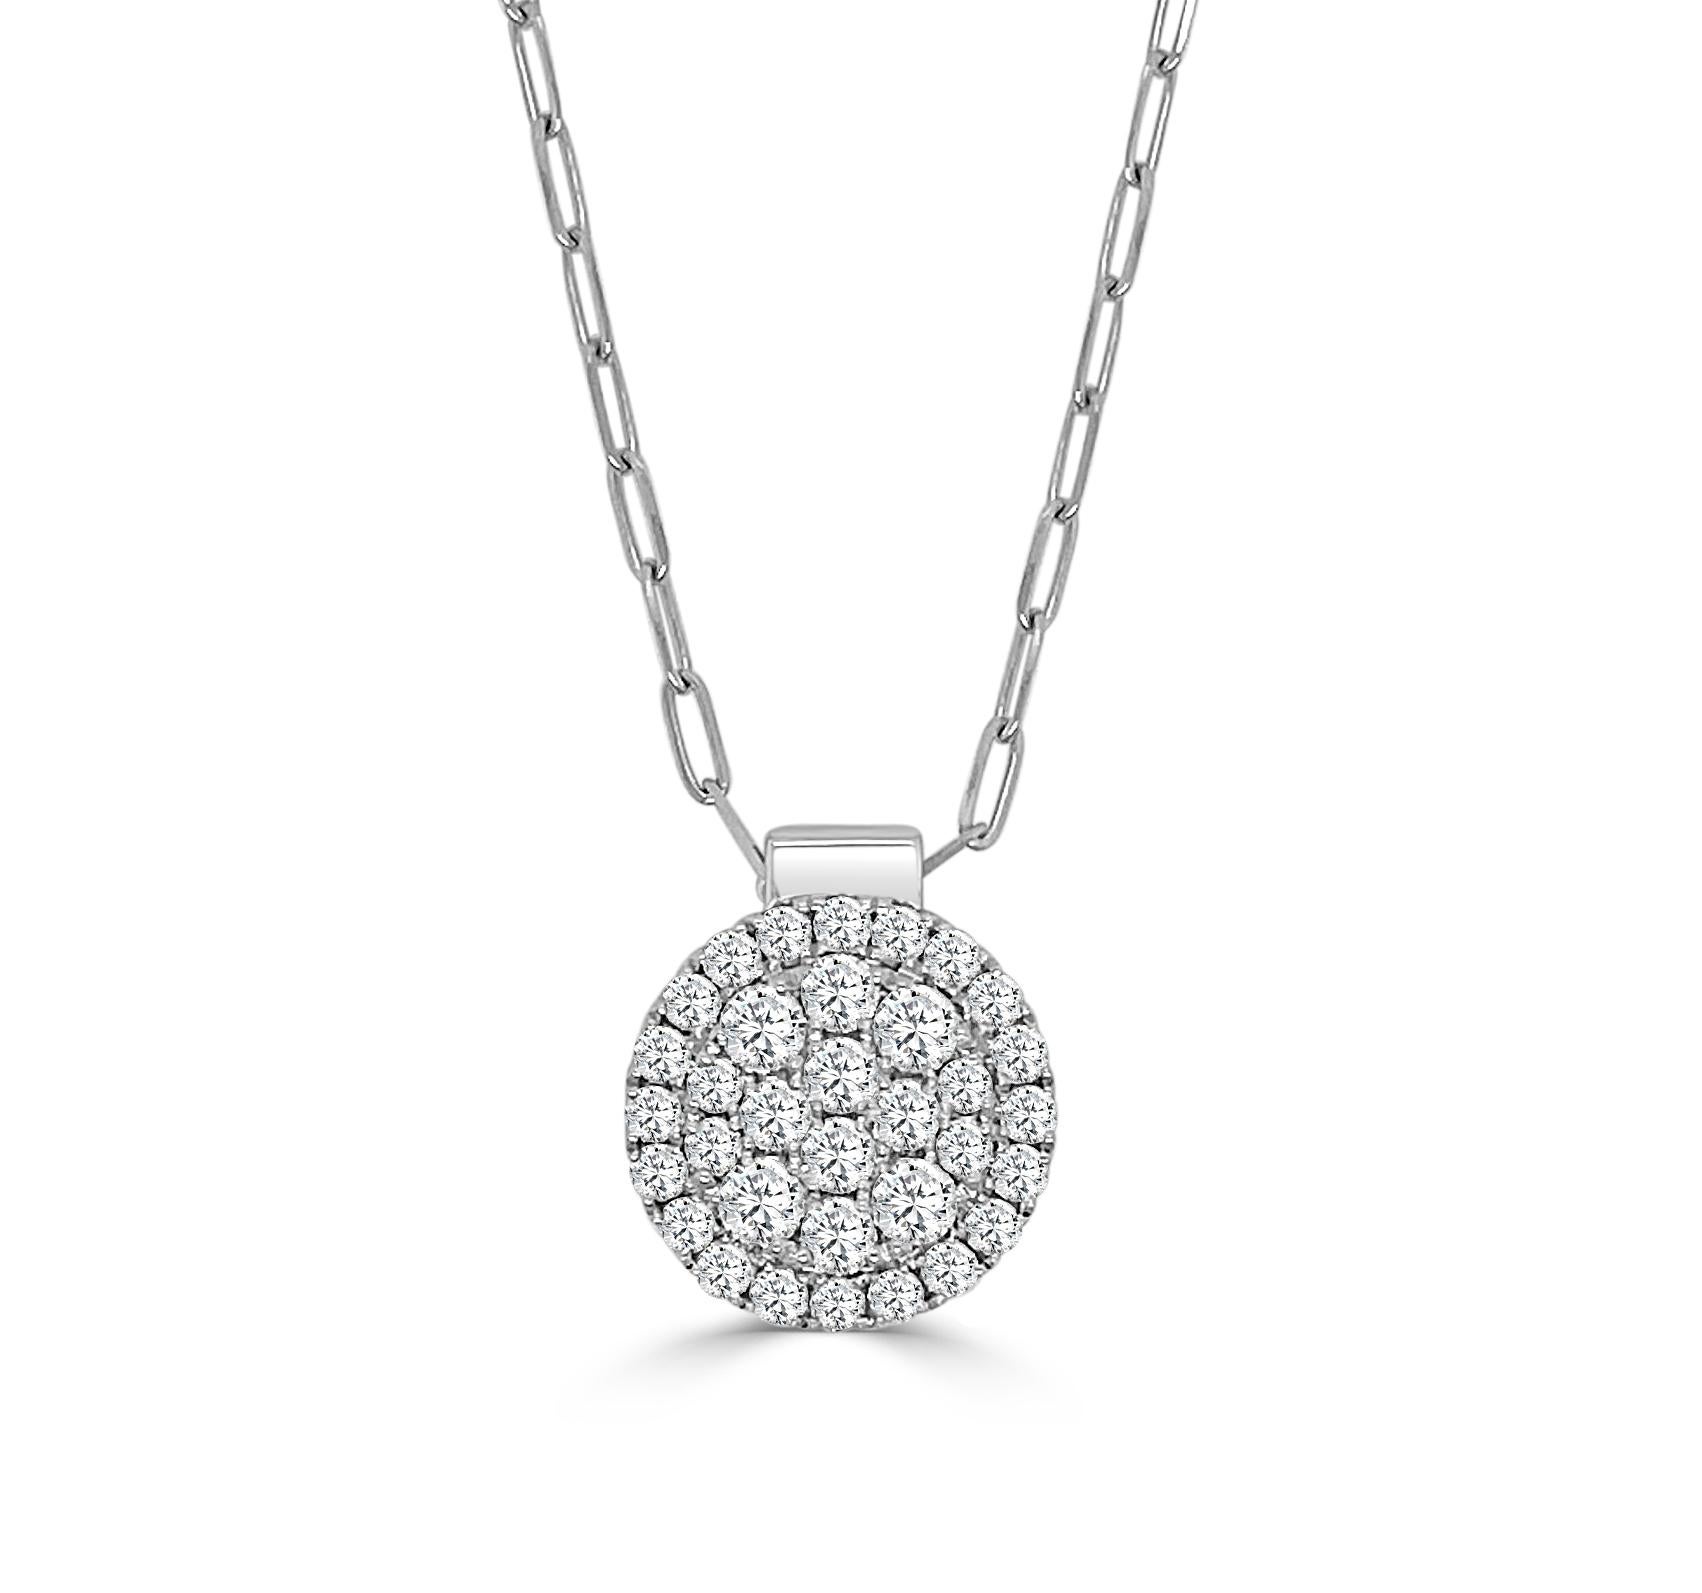 14K White Gold Medium 2 Round Firenze II DIamond Cluster Pendant With Polished Bale & Chain, 34 DIA 0.91 CT. approx 12.5 mm dia / 15 mm incl top

Available in other metal/ gemstone options: This Diamond pendant can be made in white, pink or yellow